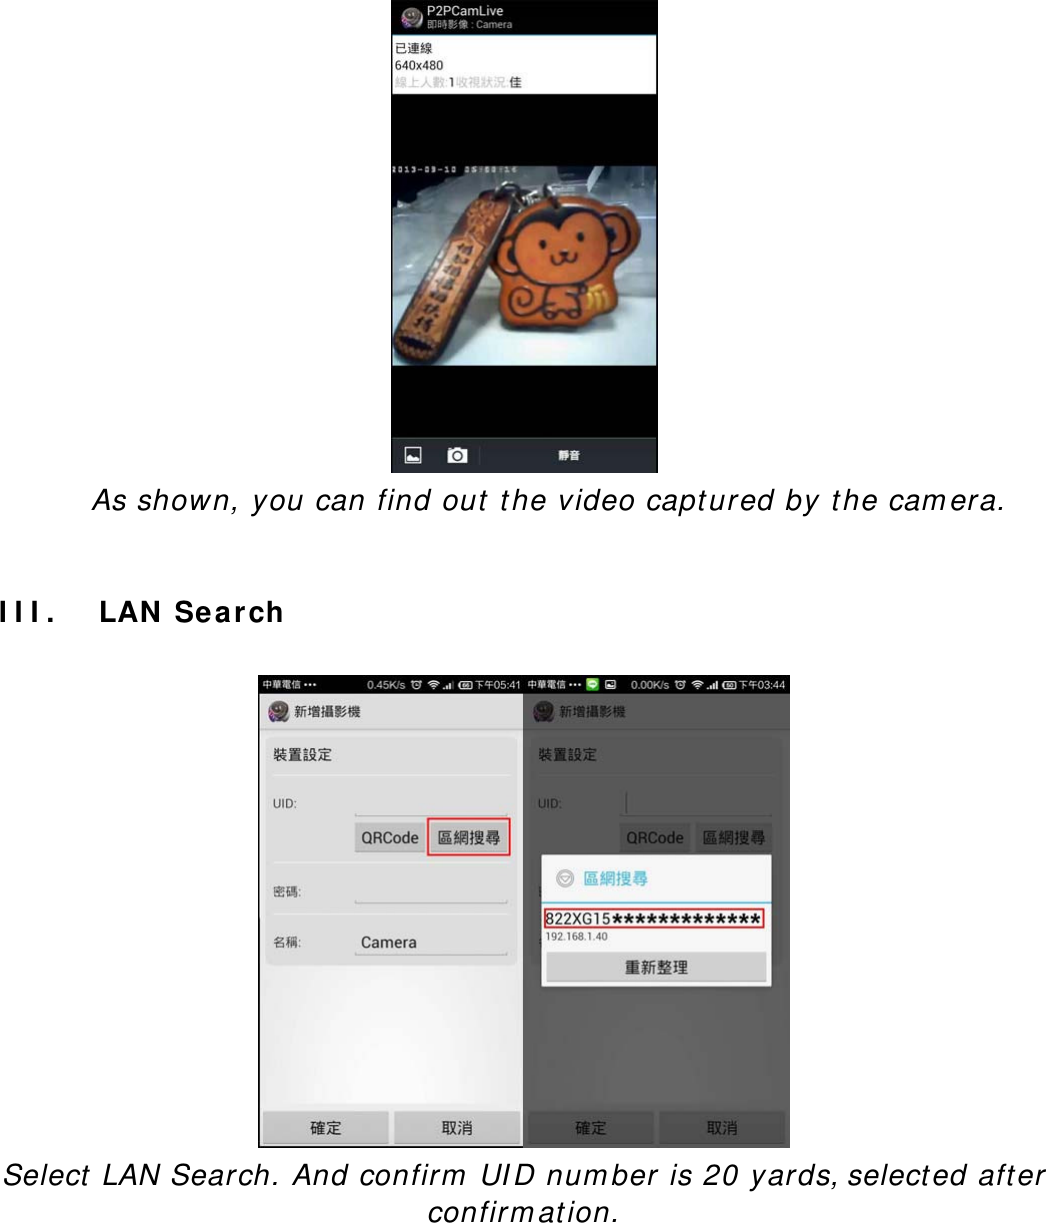  As shown, you can find out the video captured by the camera.   III. LAN Search   Select LAN Search. And confirm UID number is 20 yards, selected after confirmation.   